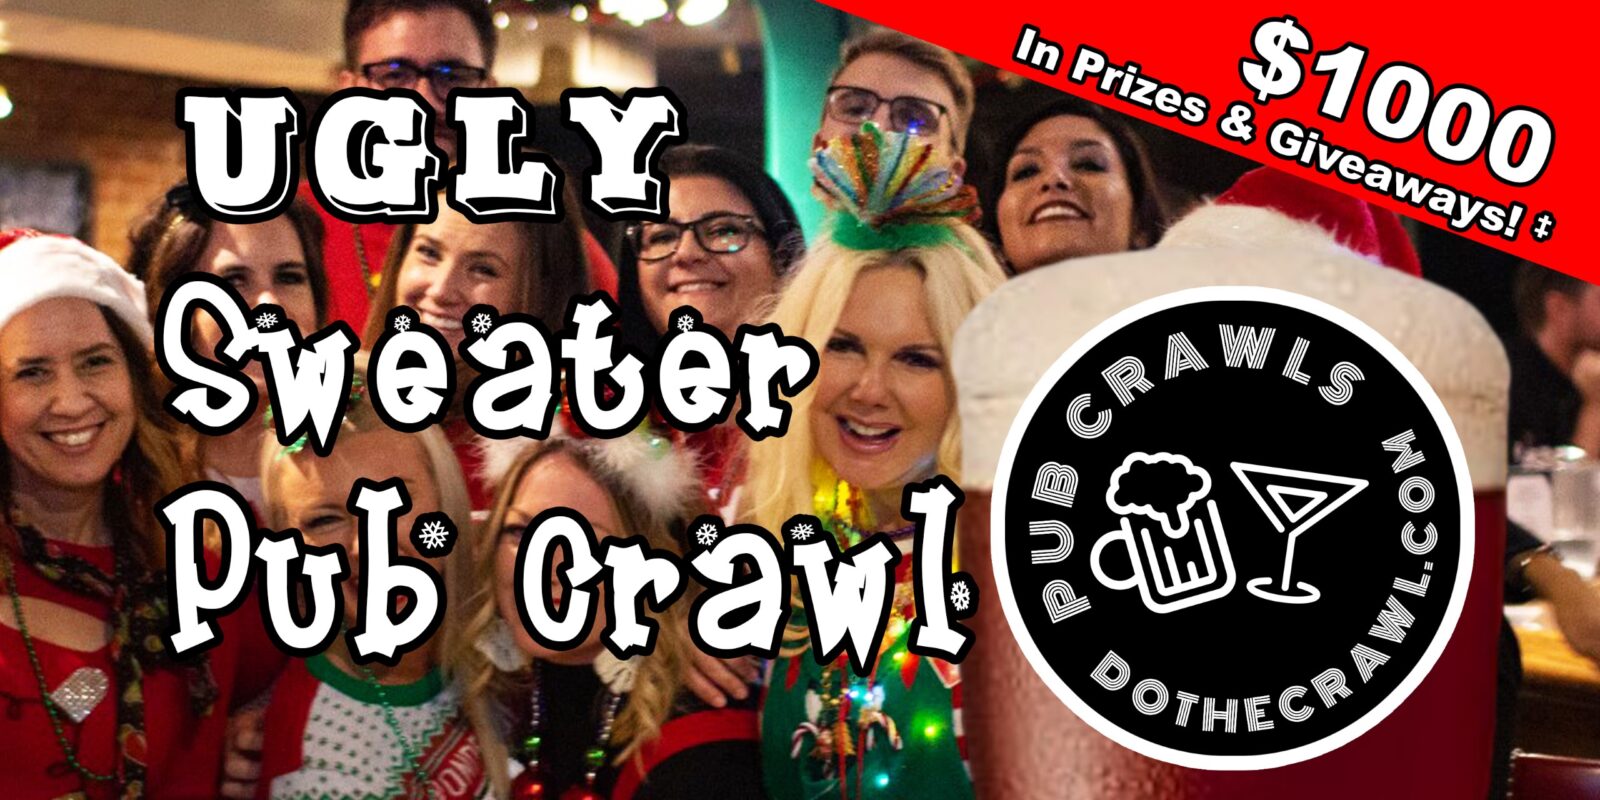 Do The Ugly Sweater Pub Crawl in Bakersfield!